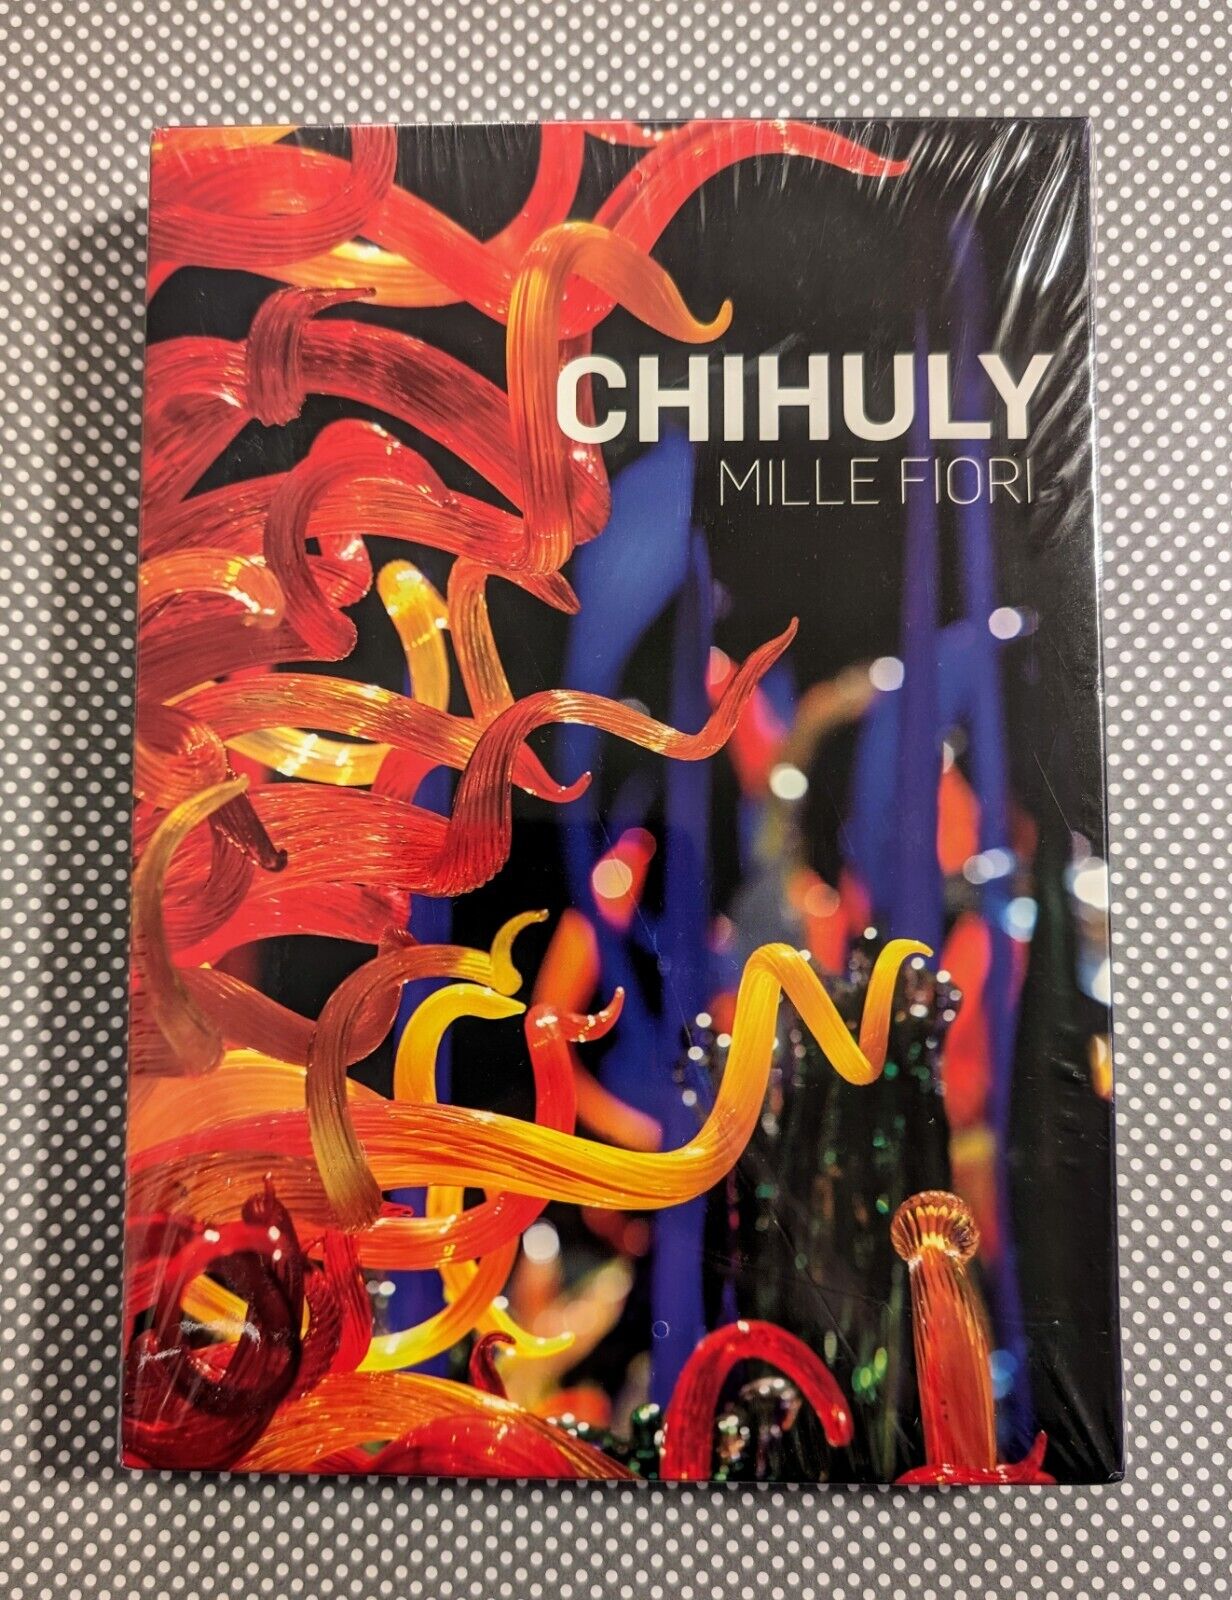 Dale Chihuly - Mille Fiori - 12 Note Cards & Envelopes Blown Glass Art Tacoma WA